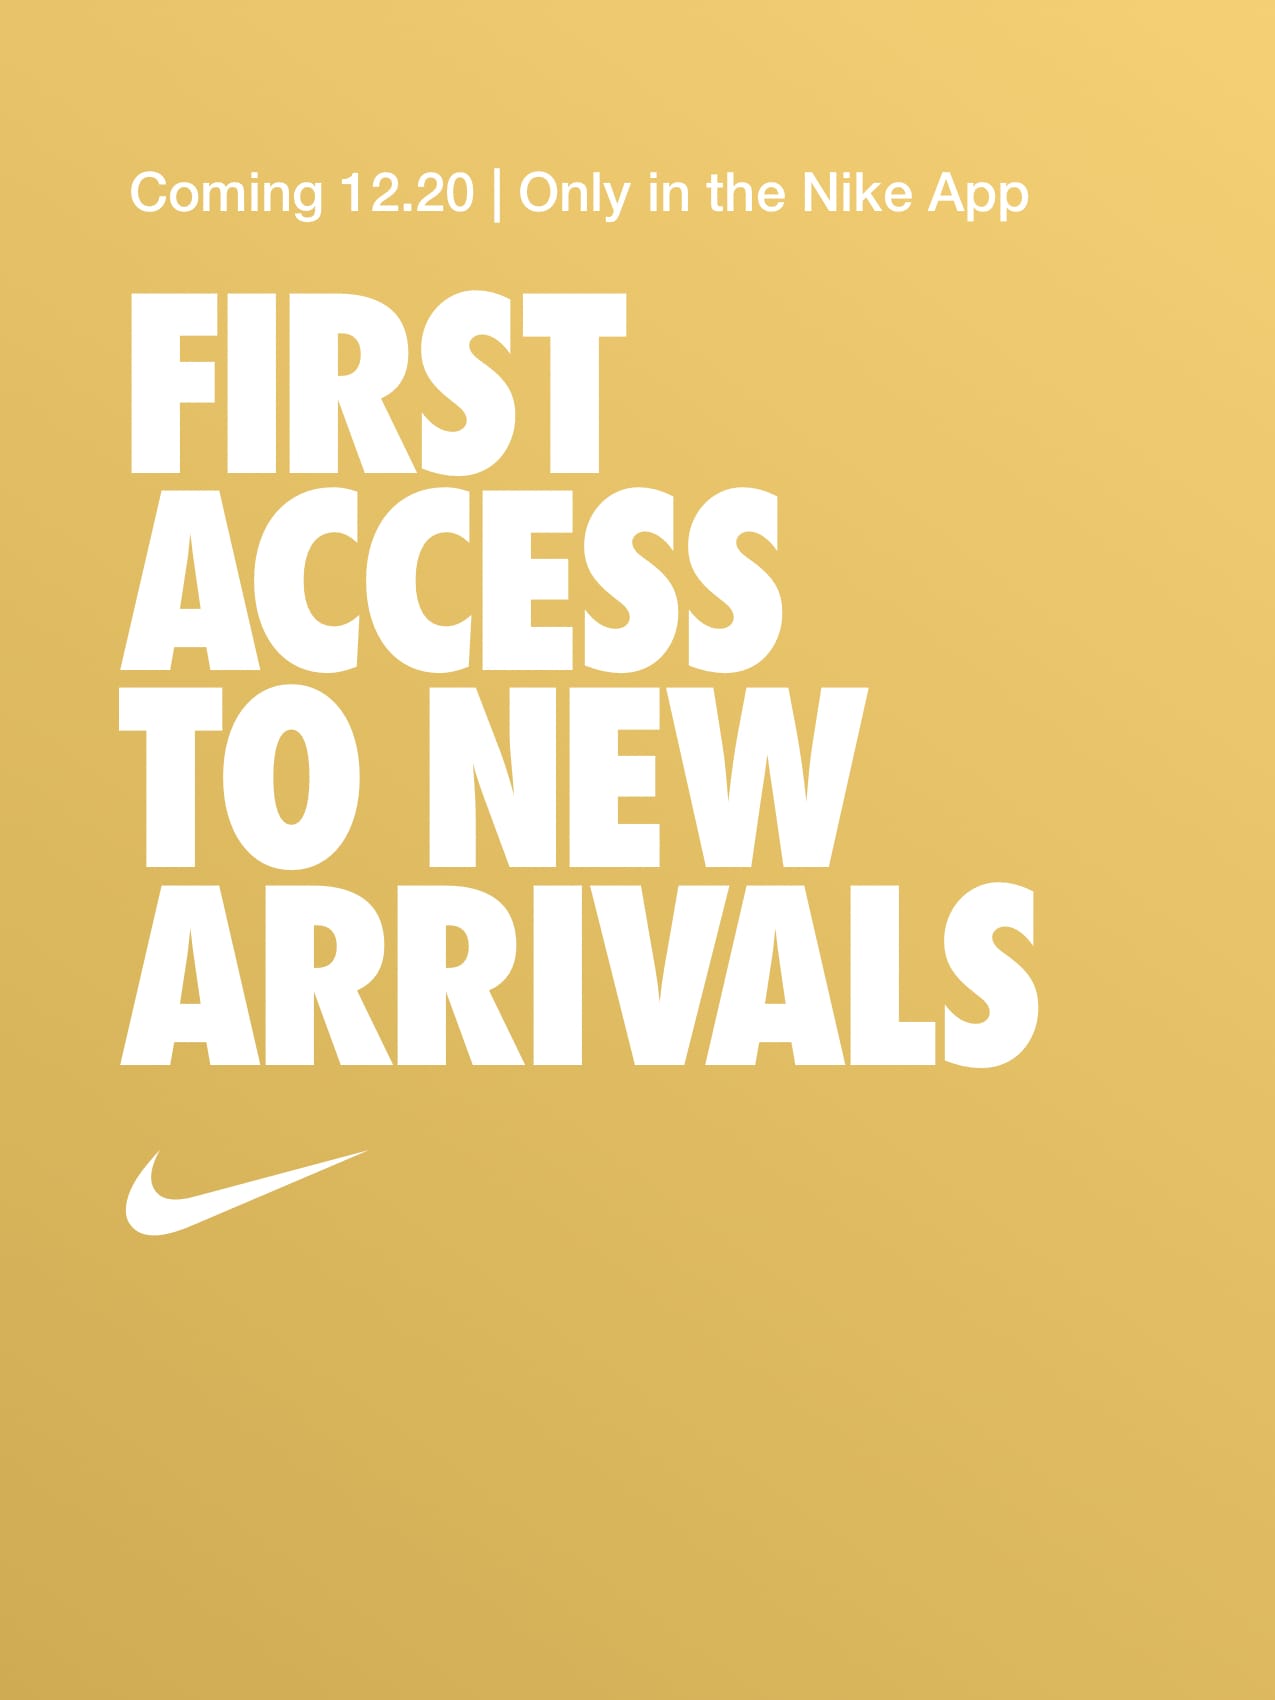 exclusively in the nike app